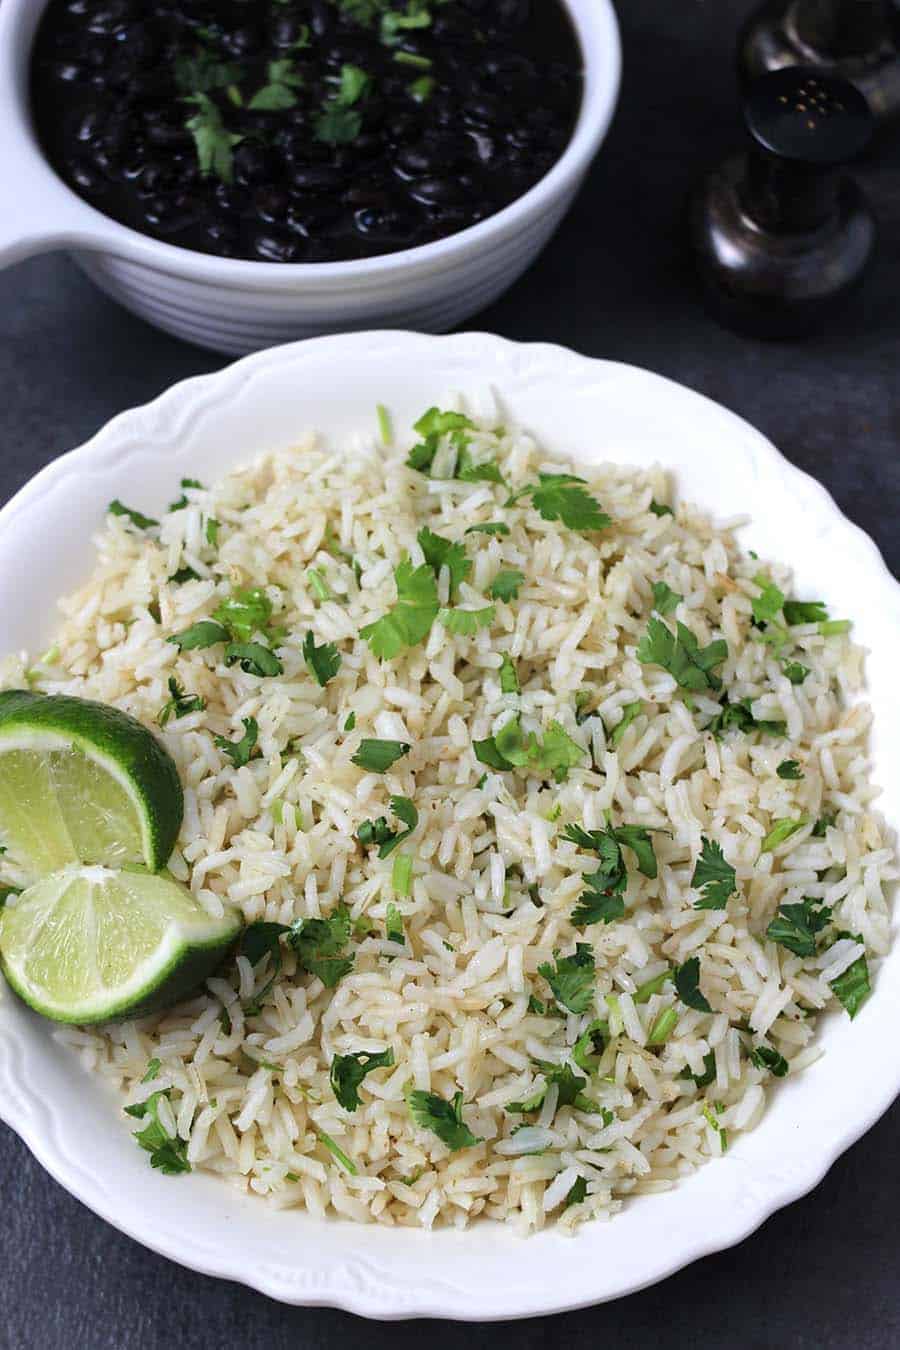 cilantro lime rice, #limes #Lemons summer vegetables and fruits